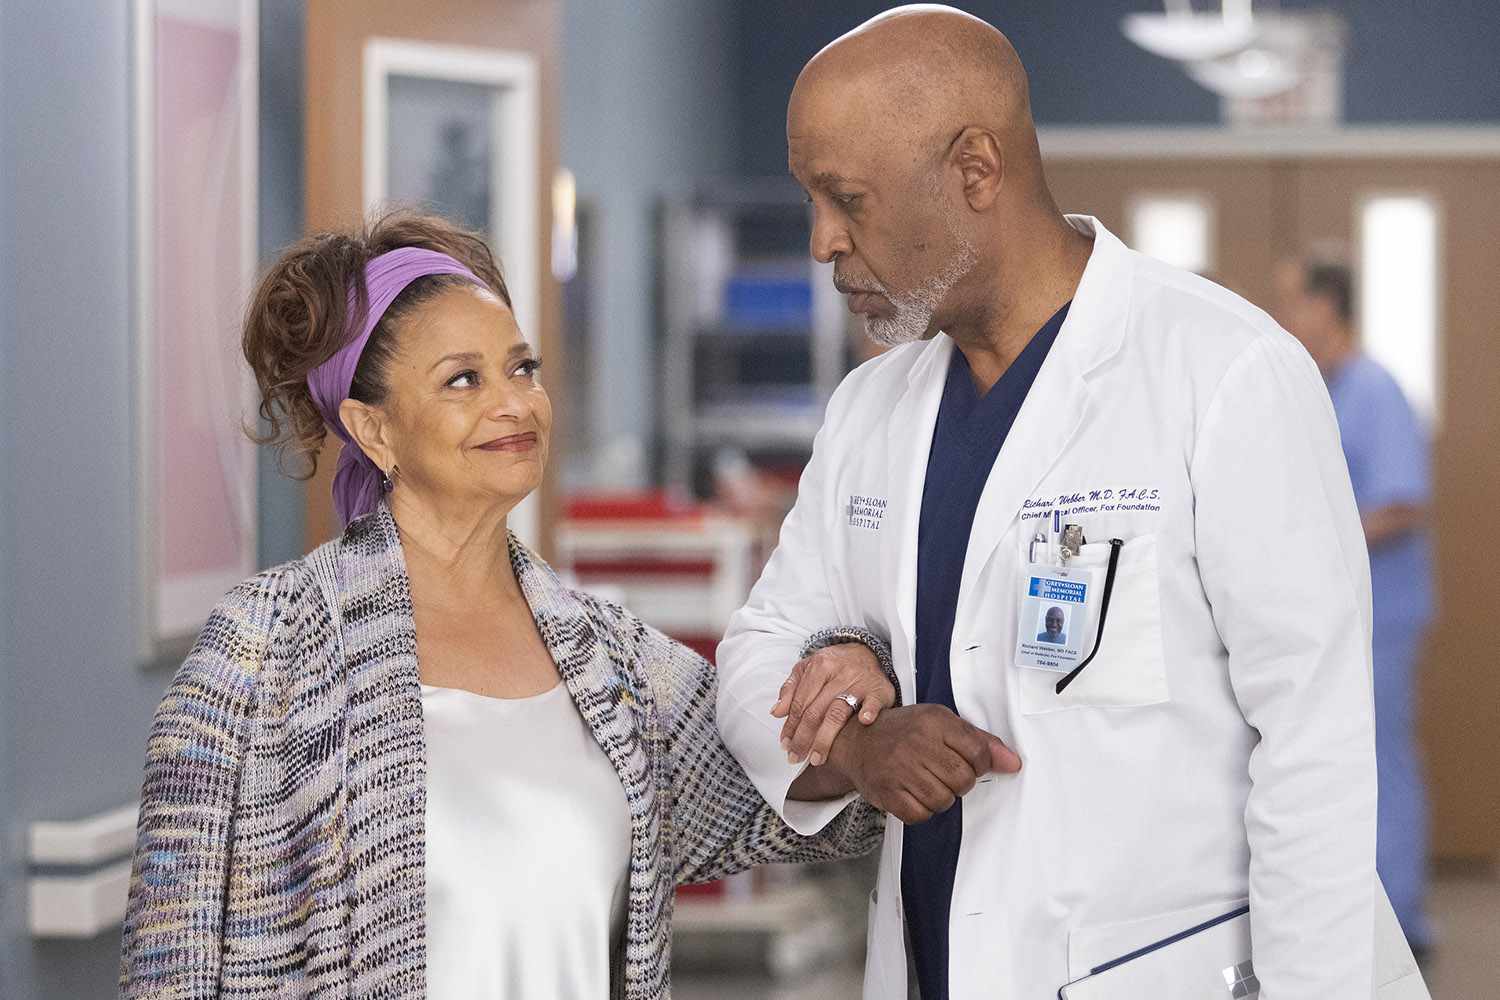 GREY’S ANATOMY - “Stronger Than Hate” – A dinner party is thrown at the sister house in Nick’s honor. Meanwhile, Grey Sloan Memorial receives a victim of a brutal hate crime on a new episode of “Grey’s Anatomy,” THURSDAY, MAY 19 (9:00-10:01 p.m. EDT), on ABC. (ABC/Liliane Lathan) DEBBIE ALLEN, JAMES PICKENS JR.